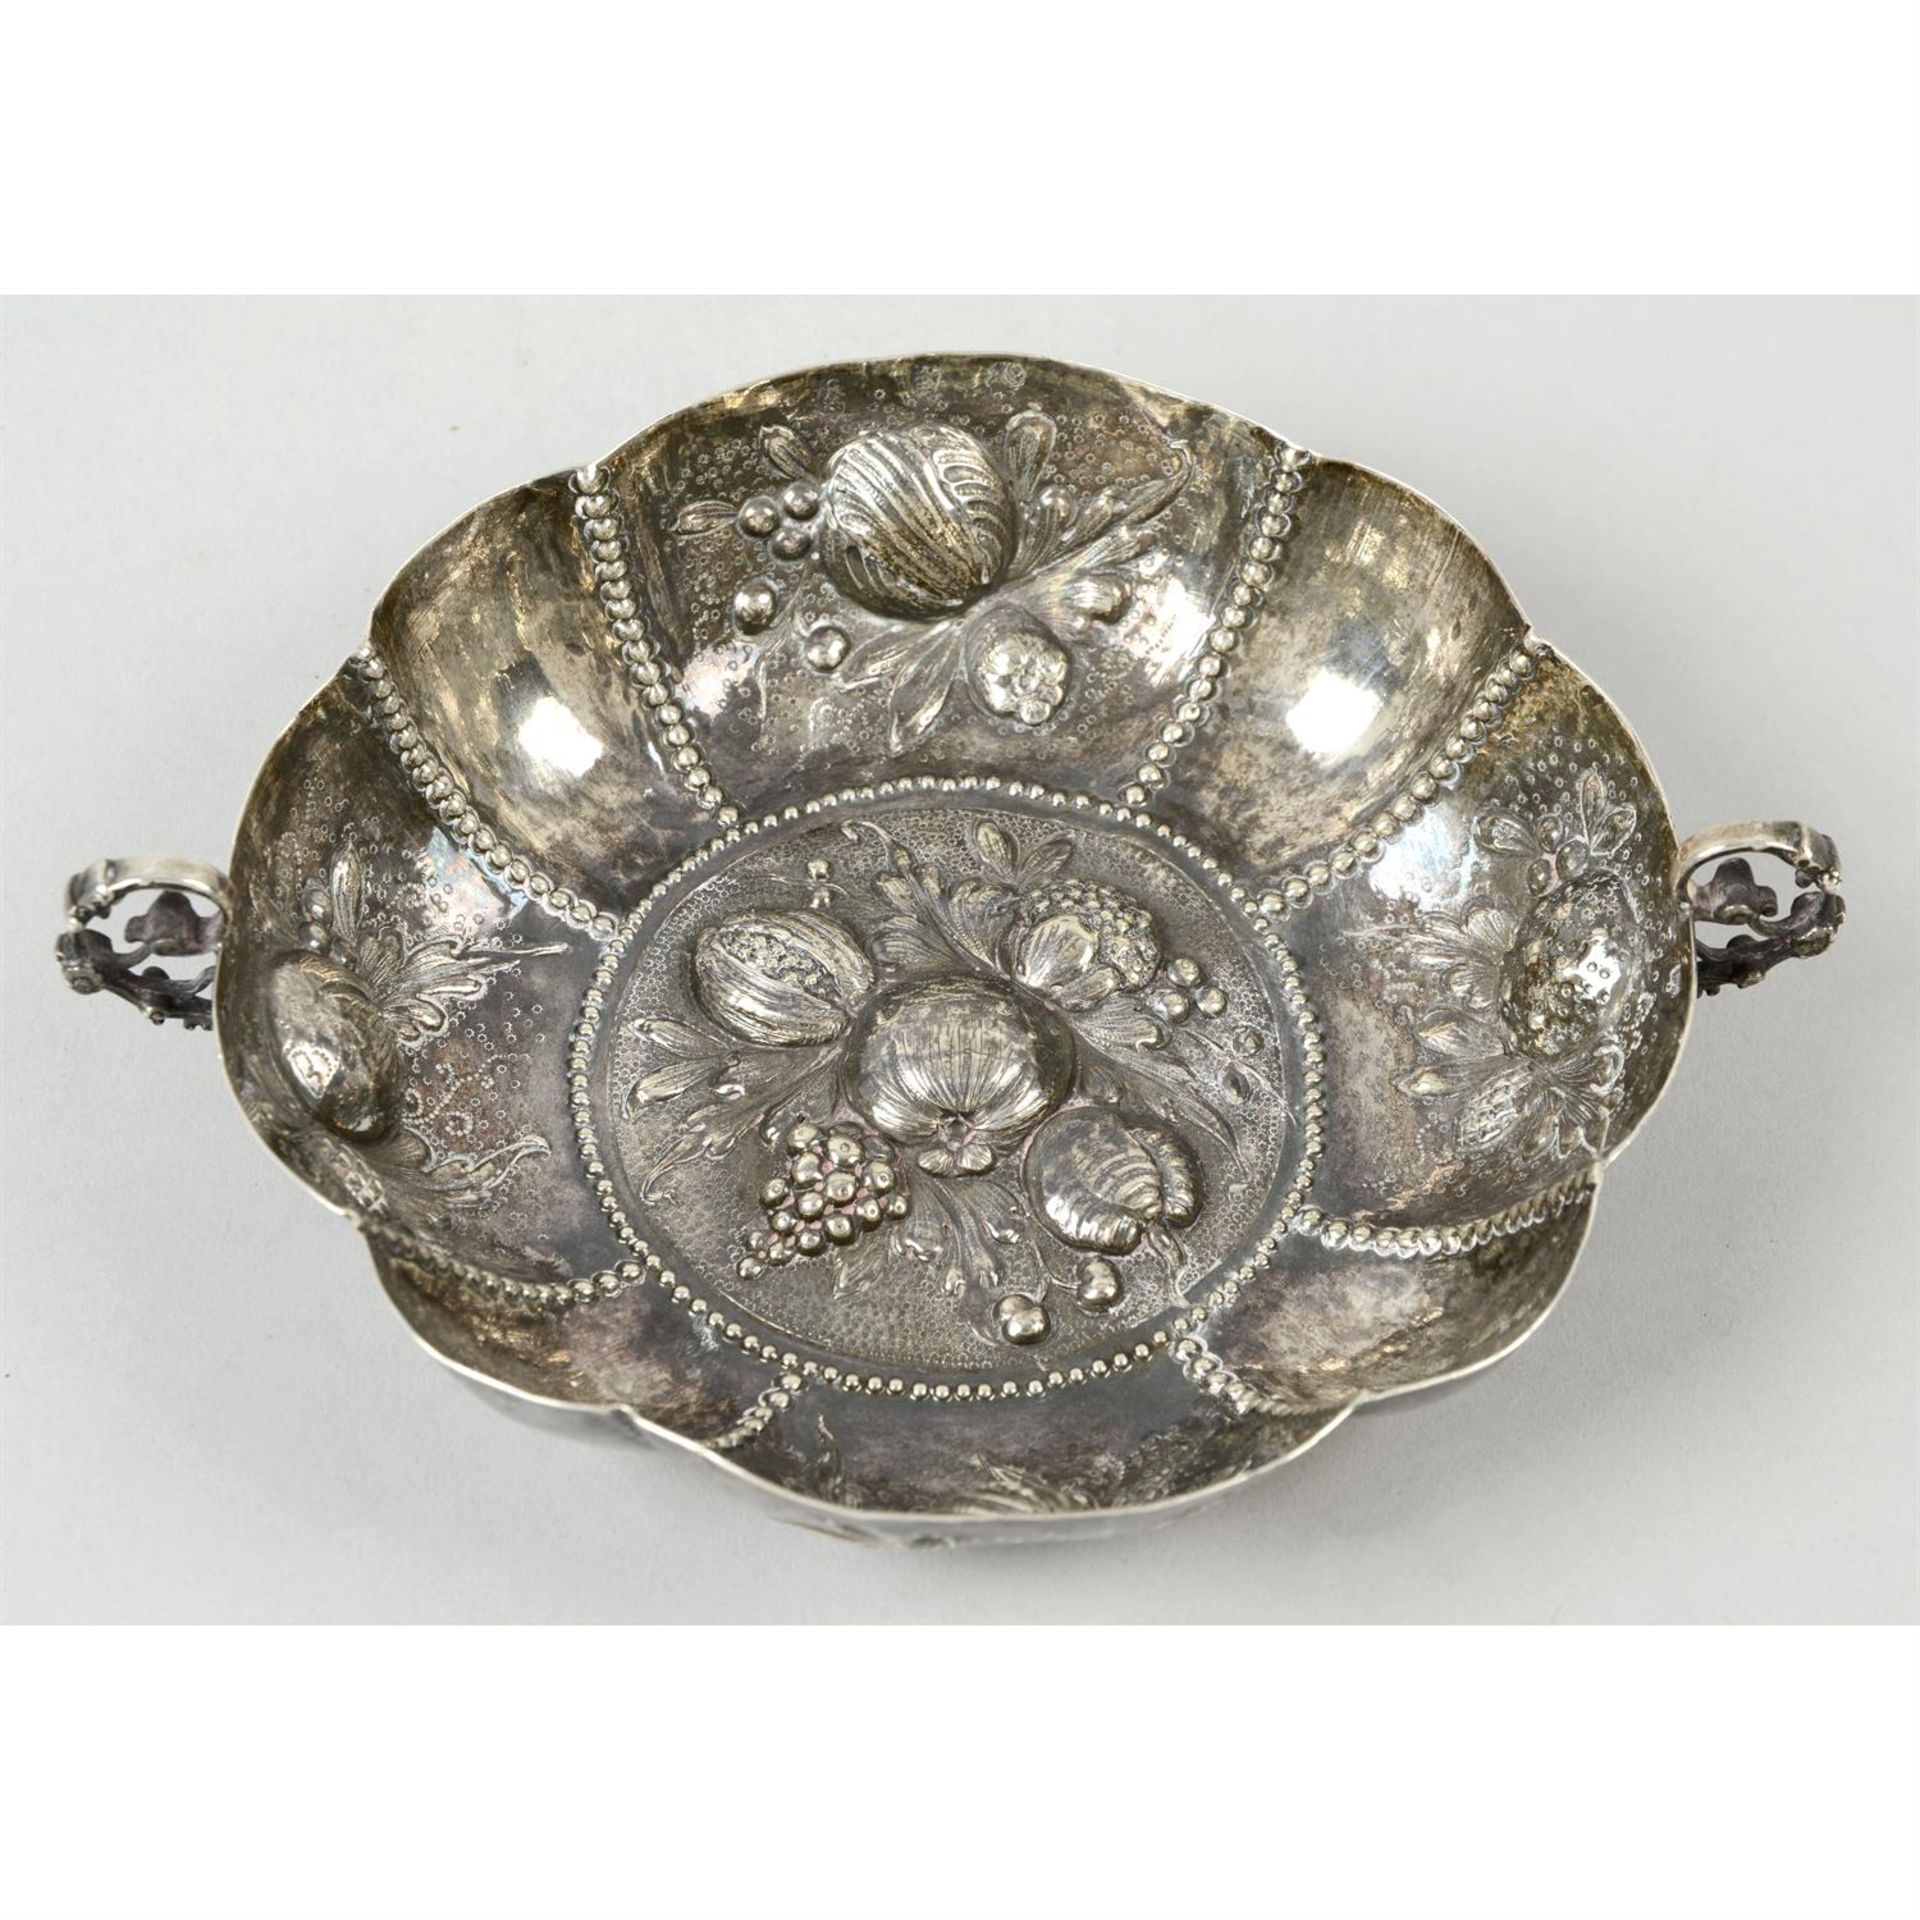 A late 19th century silver fruit embossed bowl, with import mark.